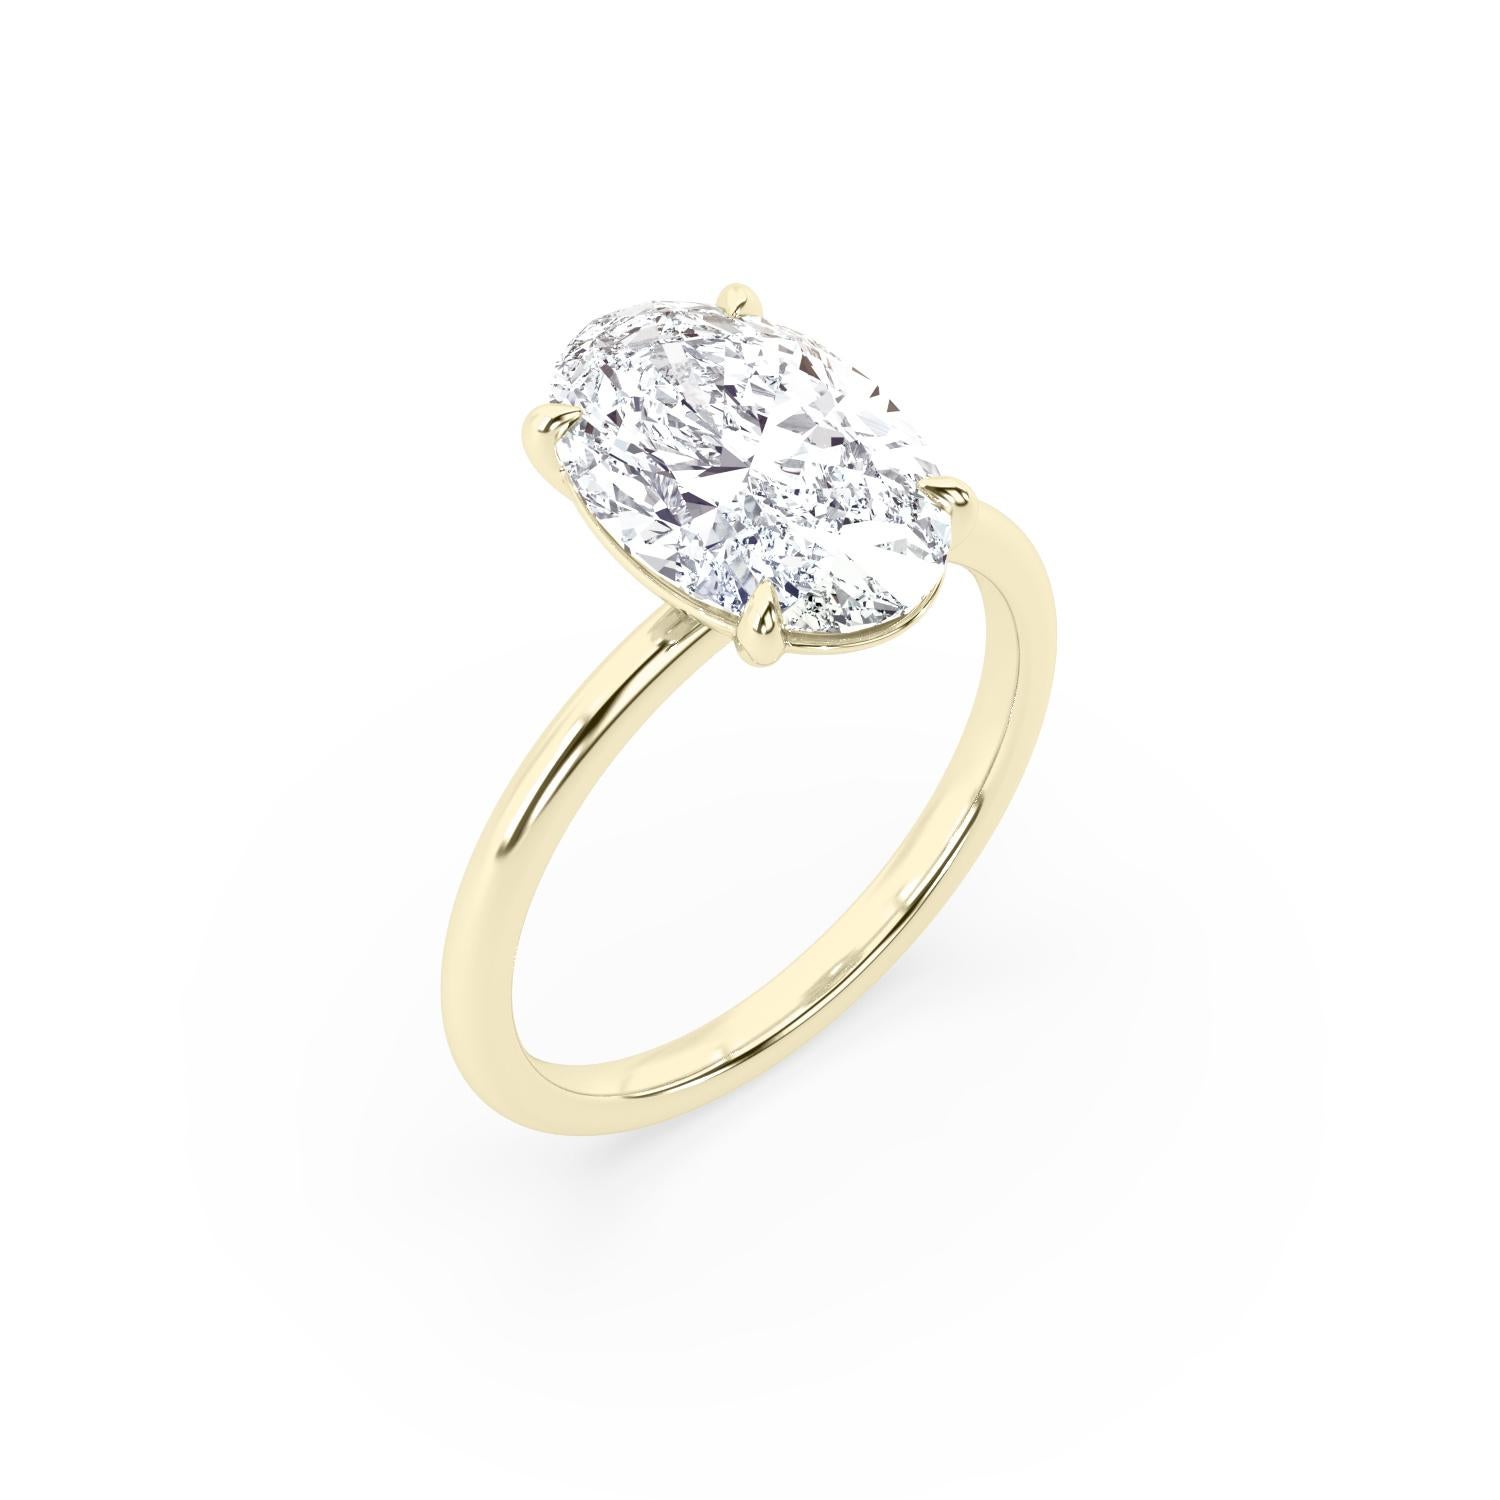 2 carat oval solitaire diamond ring yellow gold